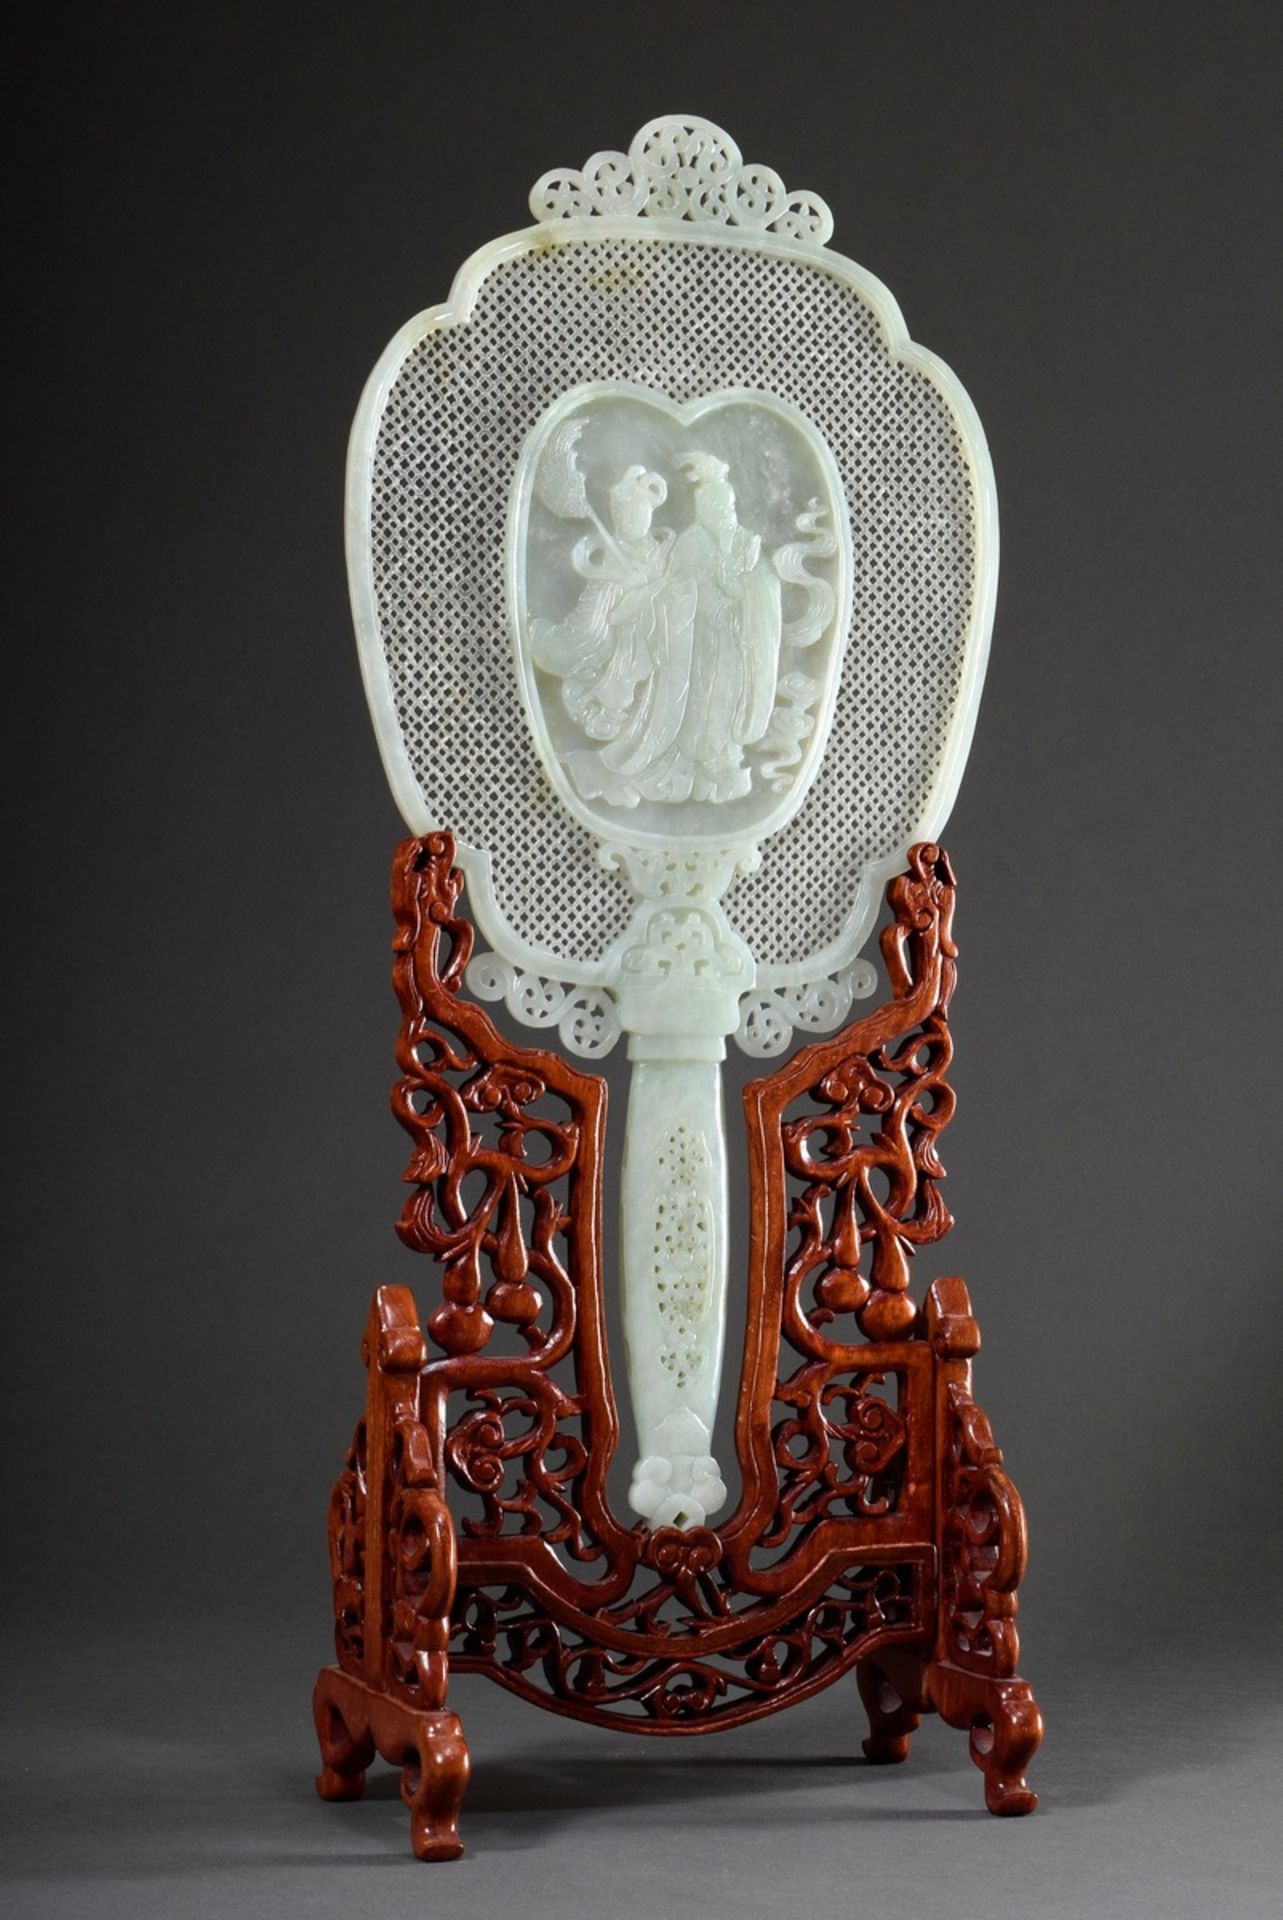 Large Chinese jade carving folding screen in hand mirror or fan form with relief "Two Persons" and 